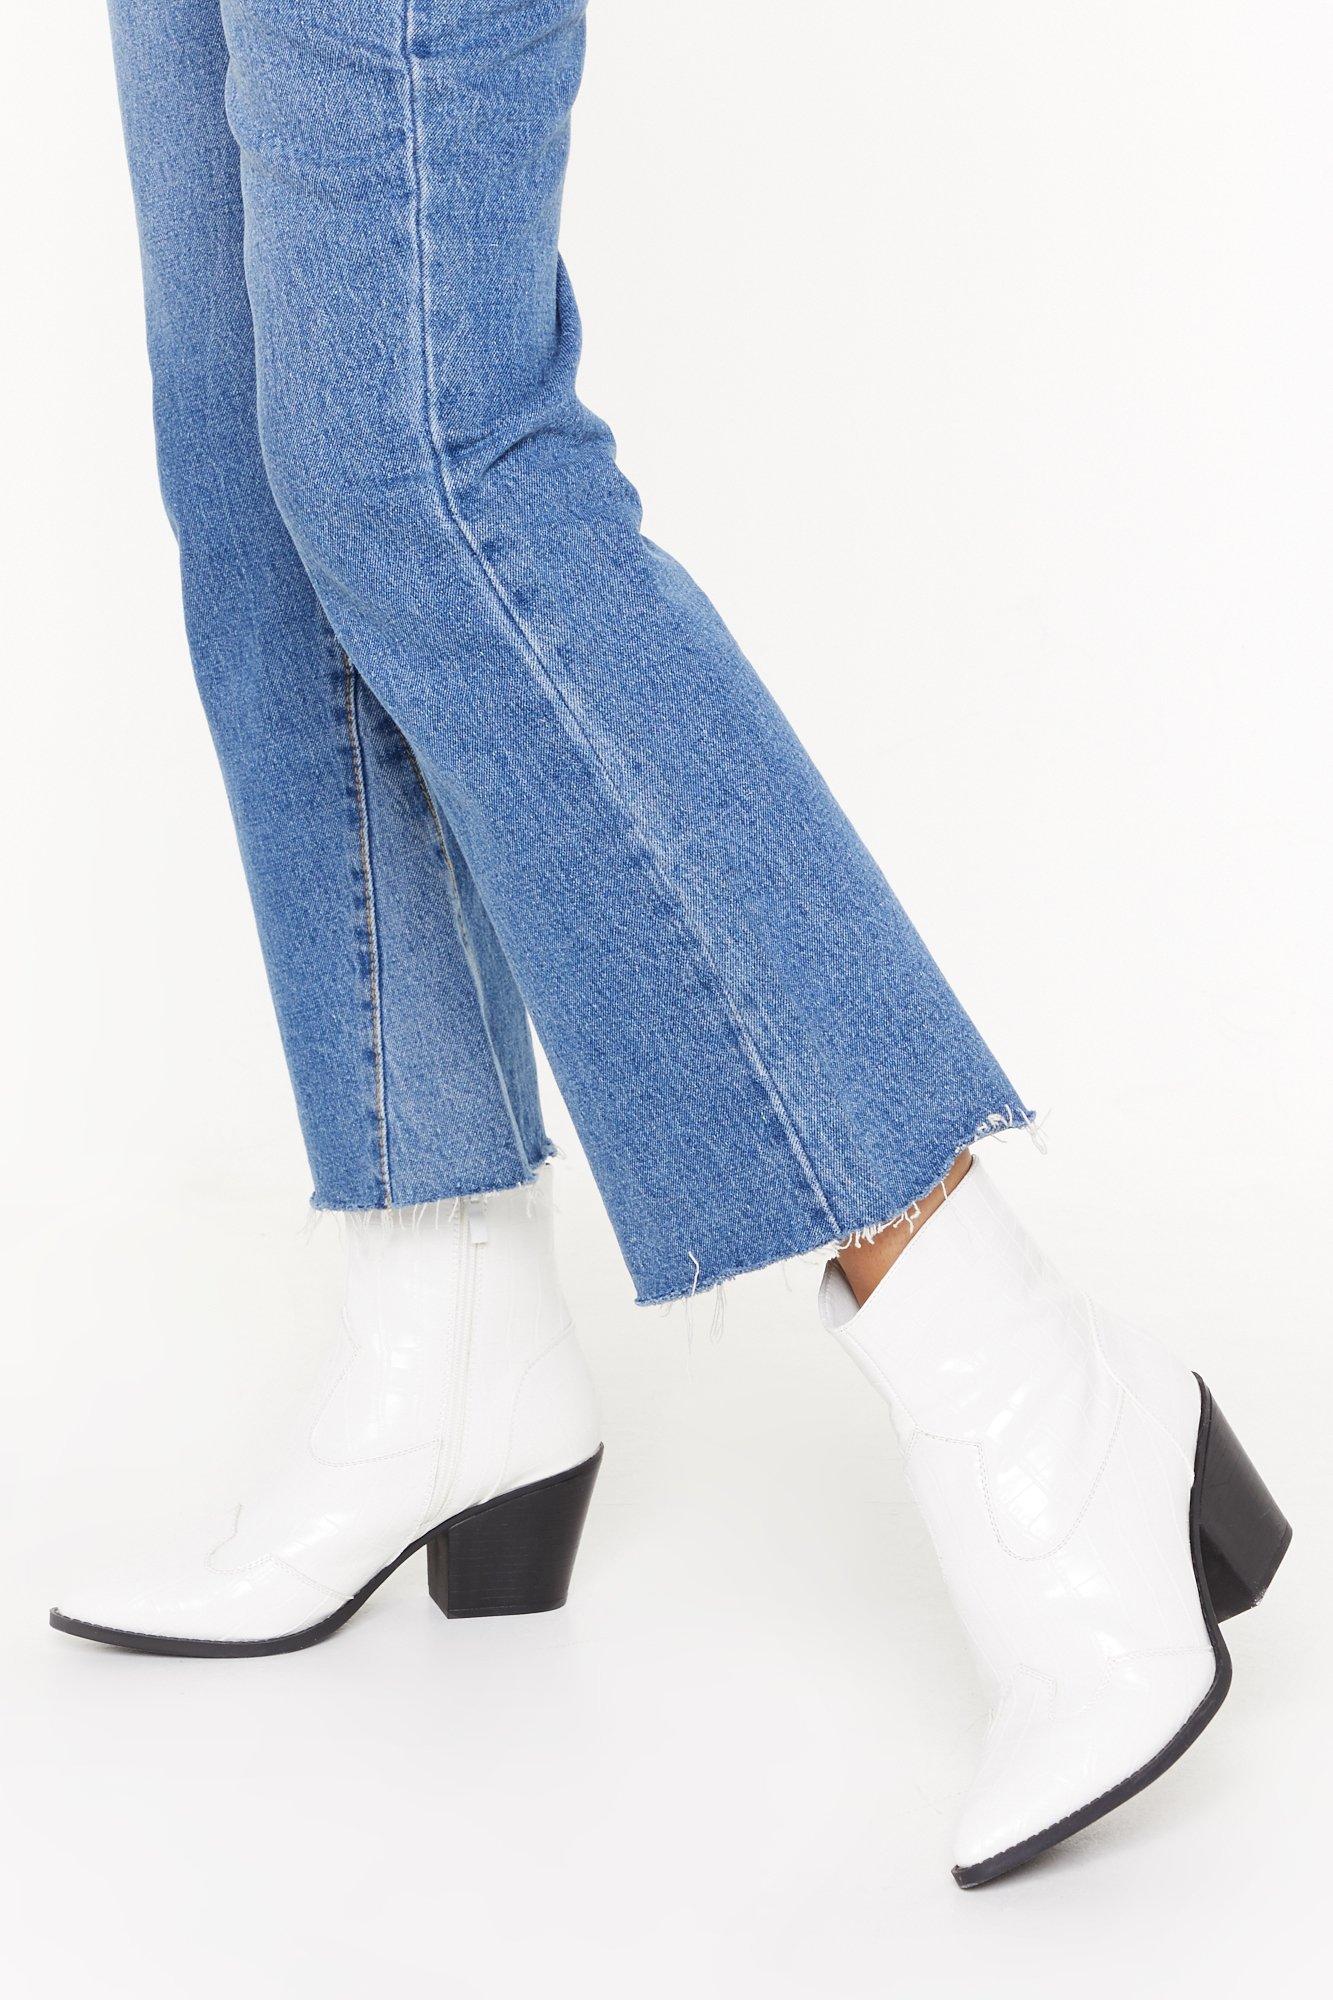 white croc ankle boots